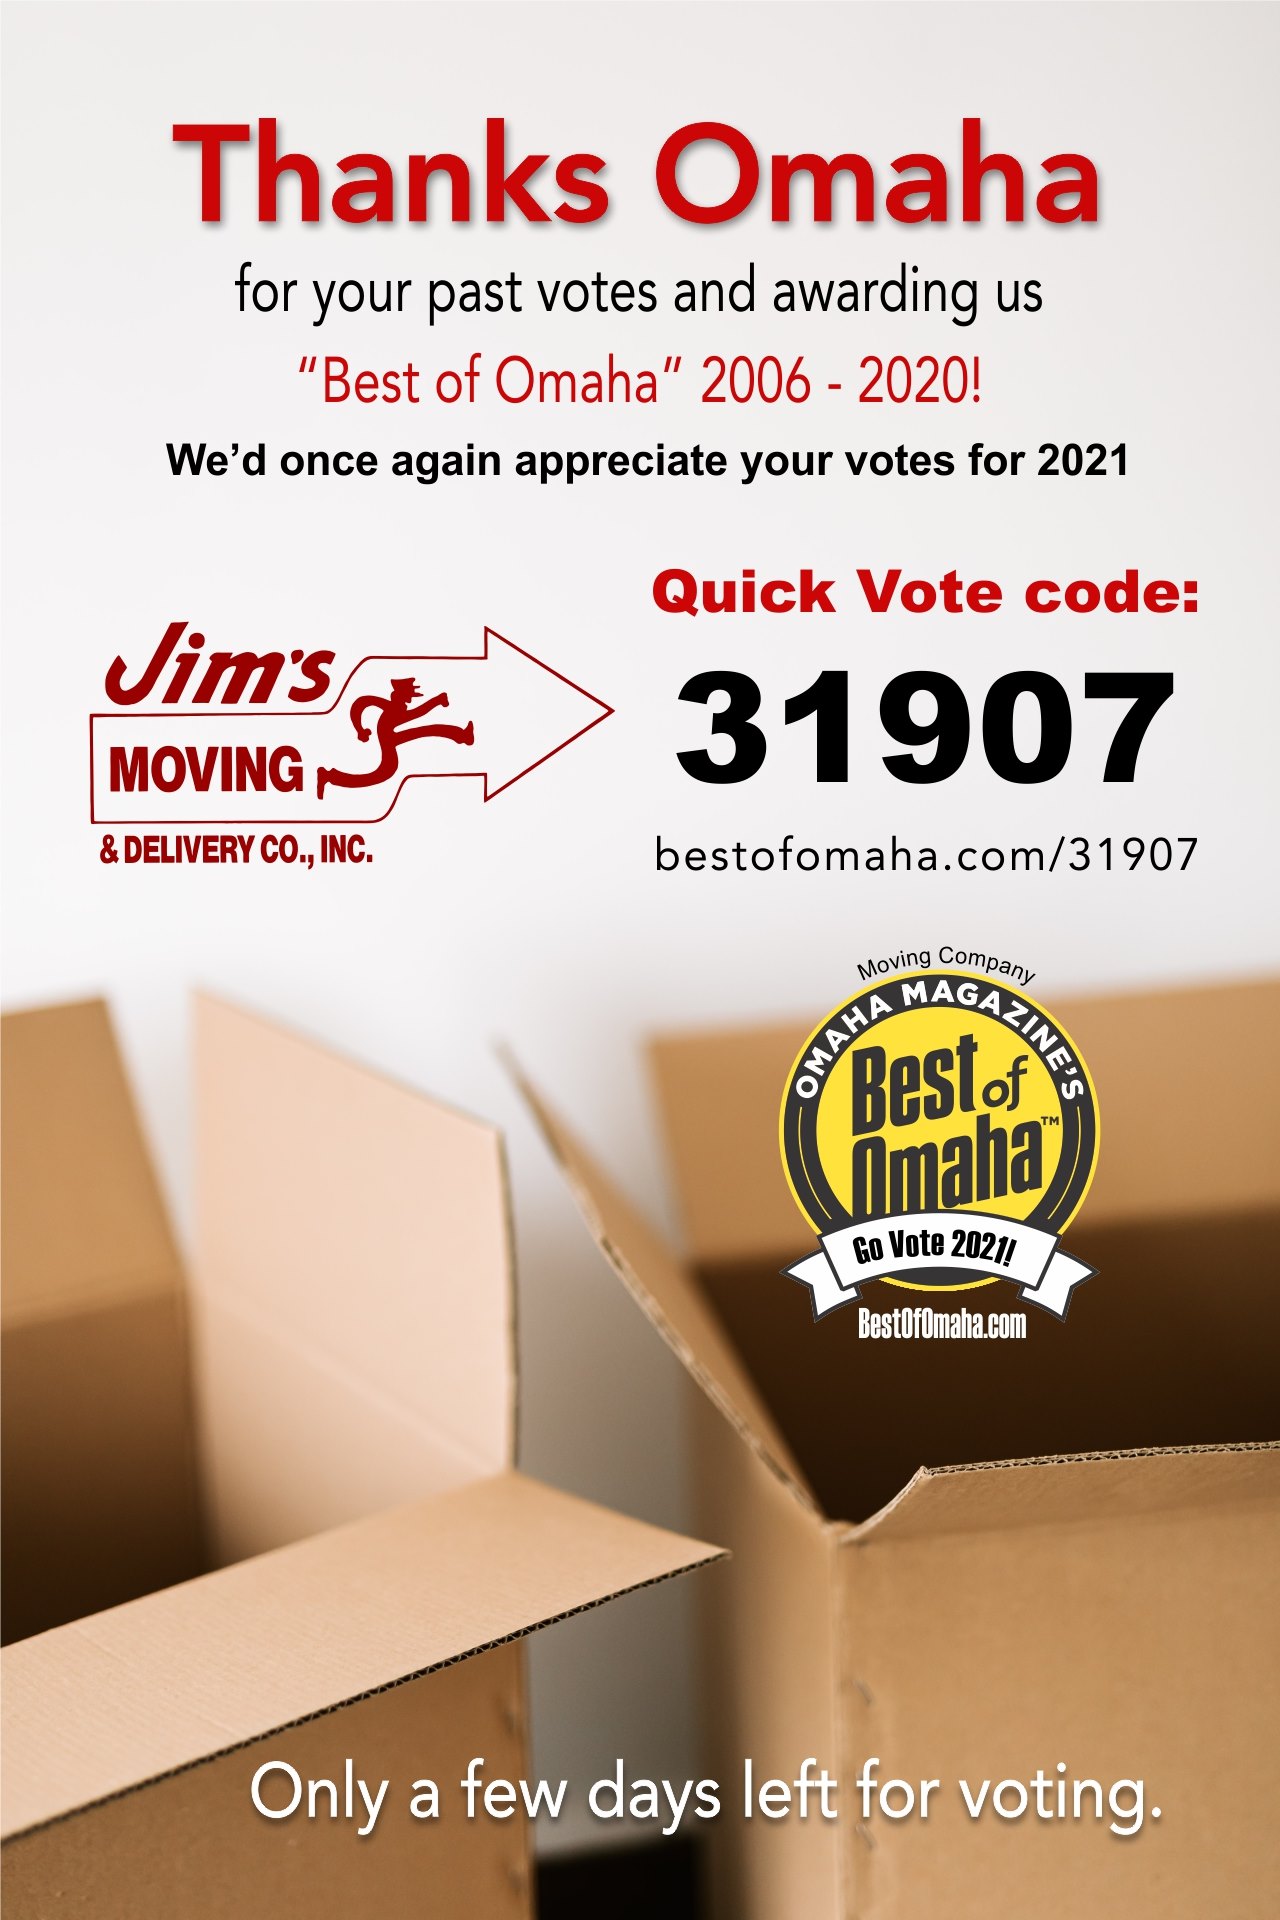 Jim's Moving & Delivery Co Inc